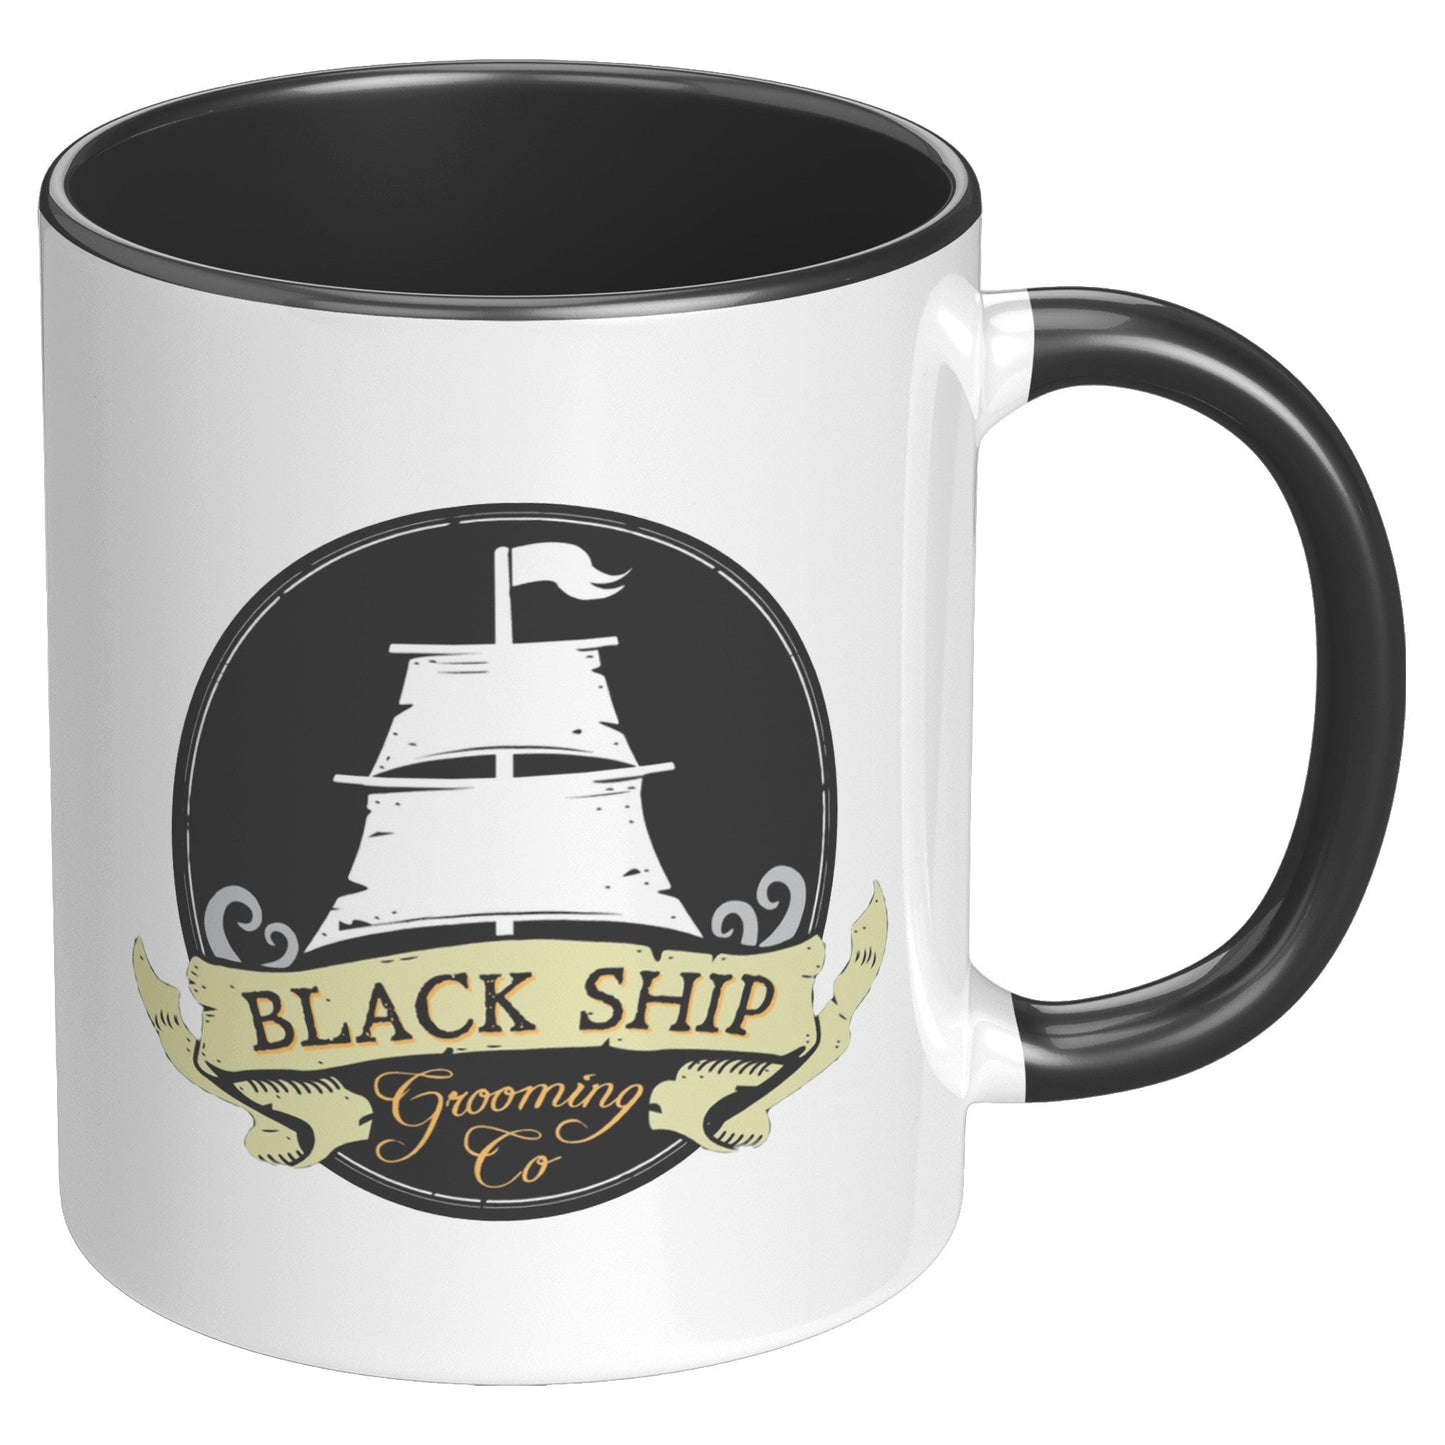 Load image into Gallery viewer, Under a Black Flag Mug - Black Ship Grooming Co.
